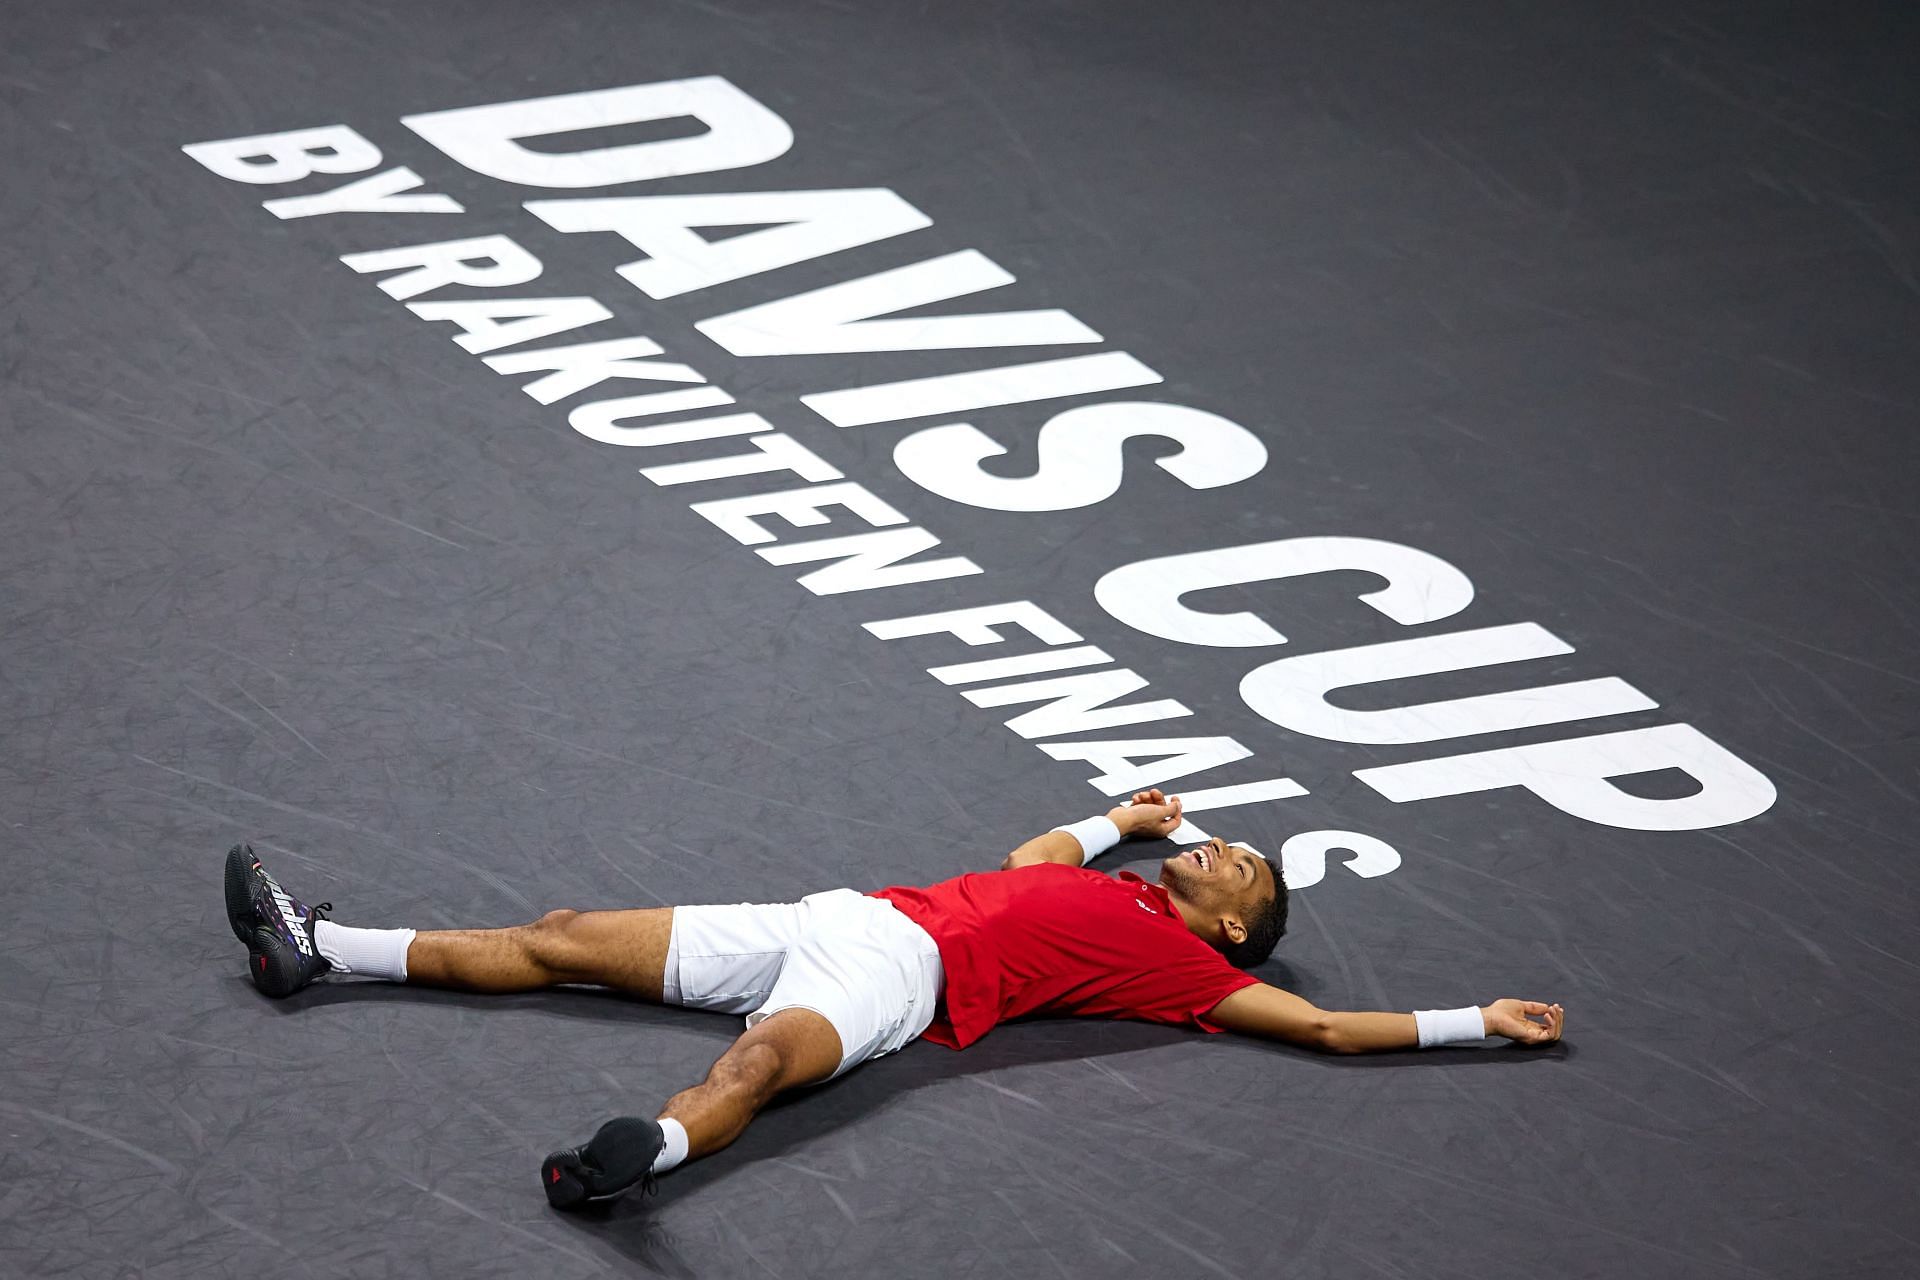 Felix Auger-Aliassime sprawls on the court as he claims the victory for Canada in the Davis Cup.